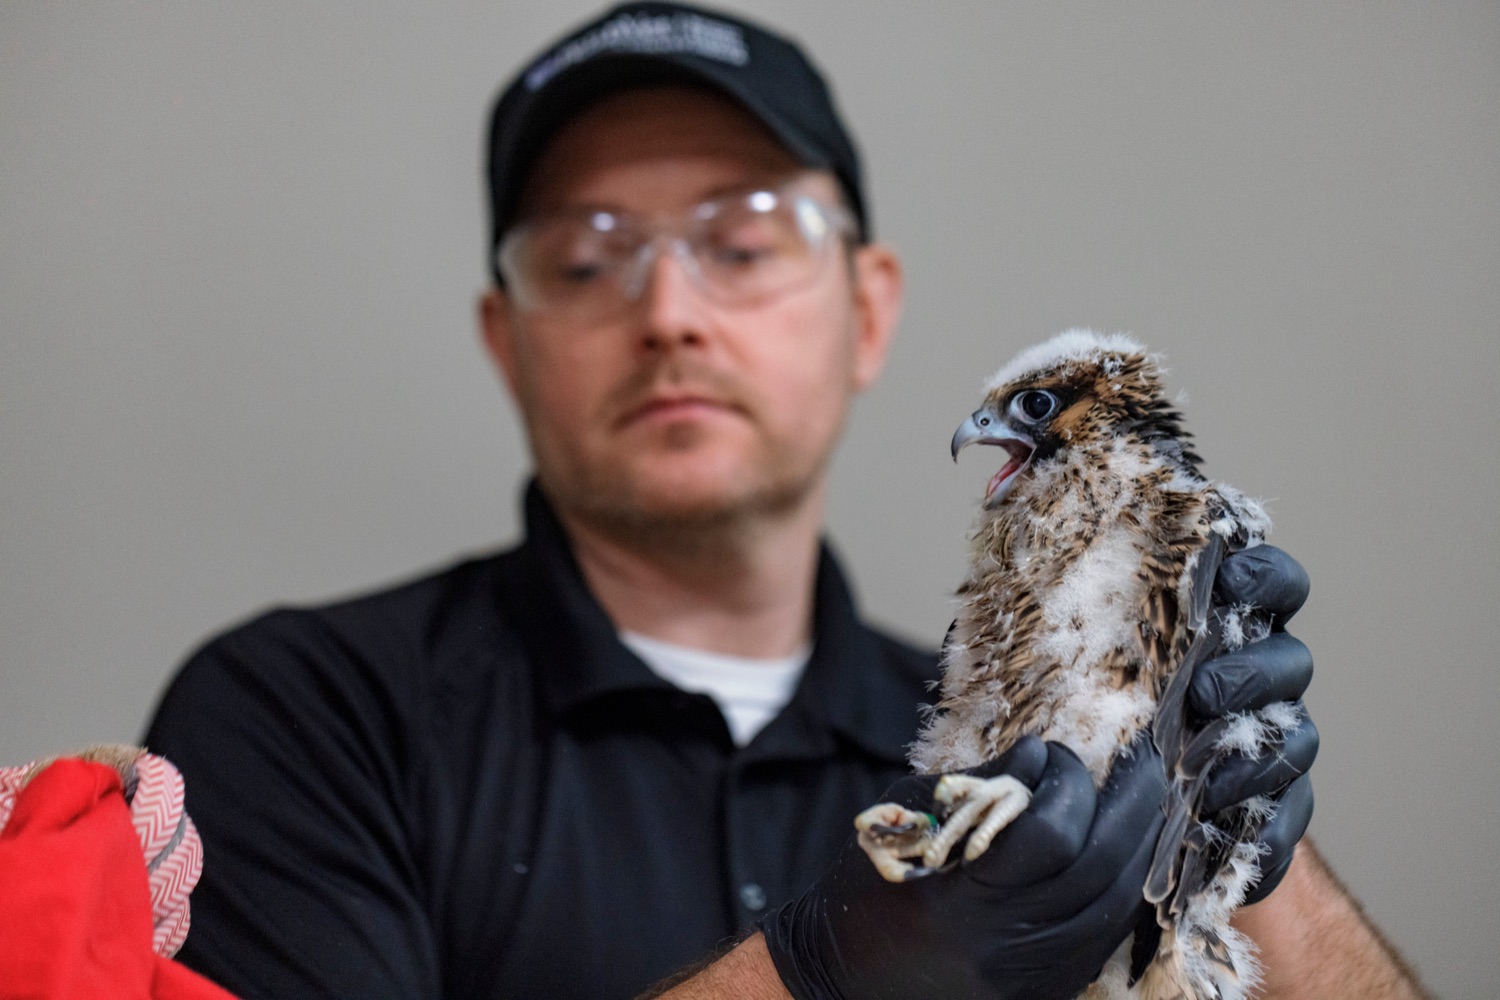 Pennsylvania School of Veterinary Medicines Ian Gereg, wildlife health technician, holds up a peregrine falcon nestling inside the Rachel Carson State Office Building on Wednesday, June 7, 2023. Banding the falcons allows biologists and birdwatchers from all over the continent to track the birds and help us learn more about where they travel, how long theyve lived, and whether they'll establish new nests in other places. Falcons born on the ledge at the Rachel Carson building have been tracked to locations from Florida all the way to Canada.<br><a href="https://filesource.amperwave.net/commonwealthofpa/photo/23186_DEP_FalconBanding_NK_008.jpg" target="_blank">⇣ Download Photo</a>